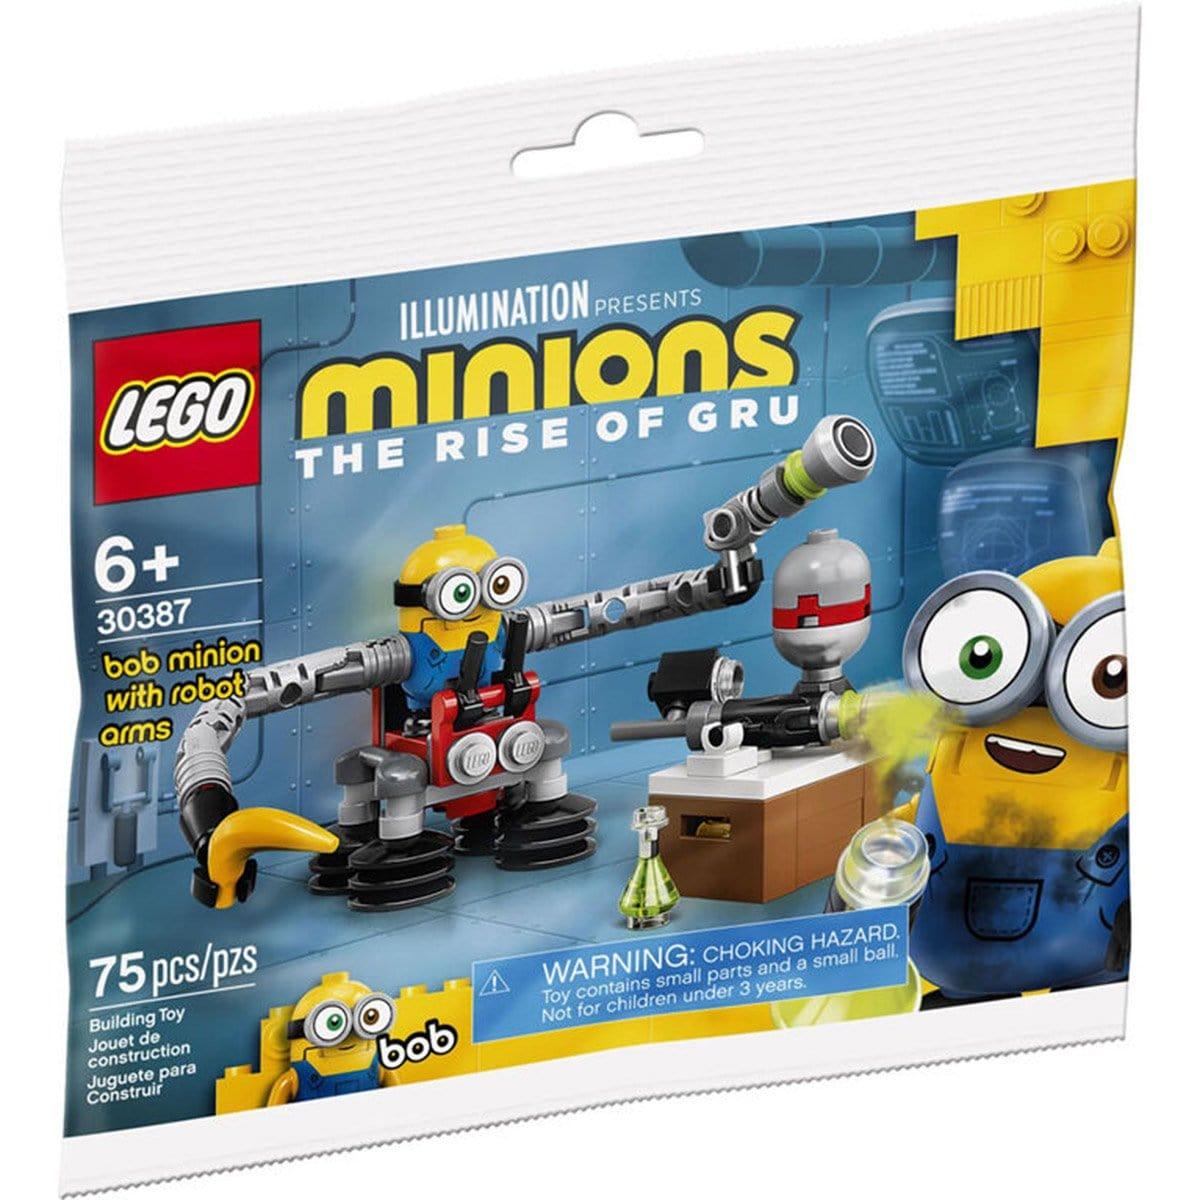 Bob the Minion with Arms, Lego Minions | Party Expert